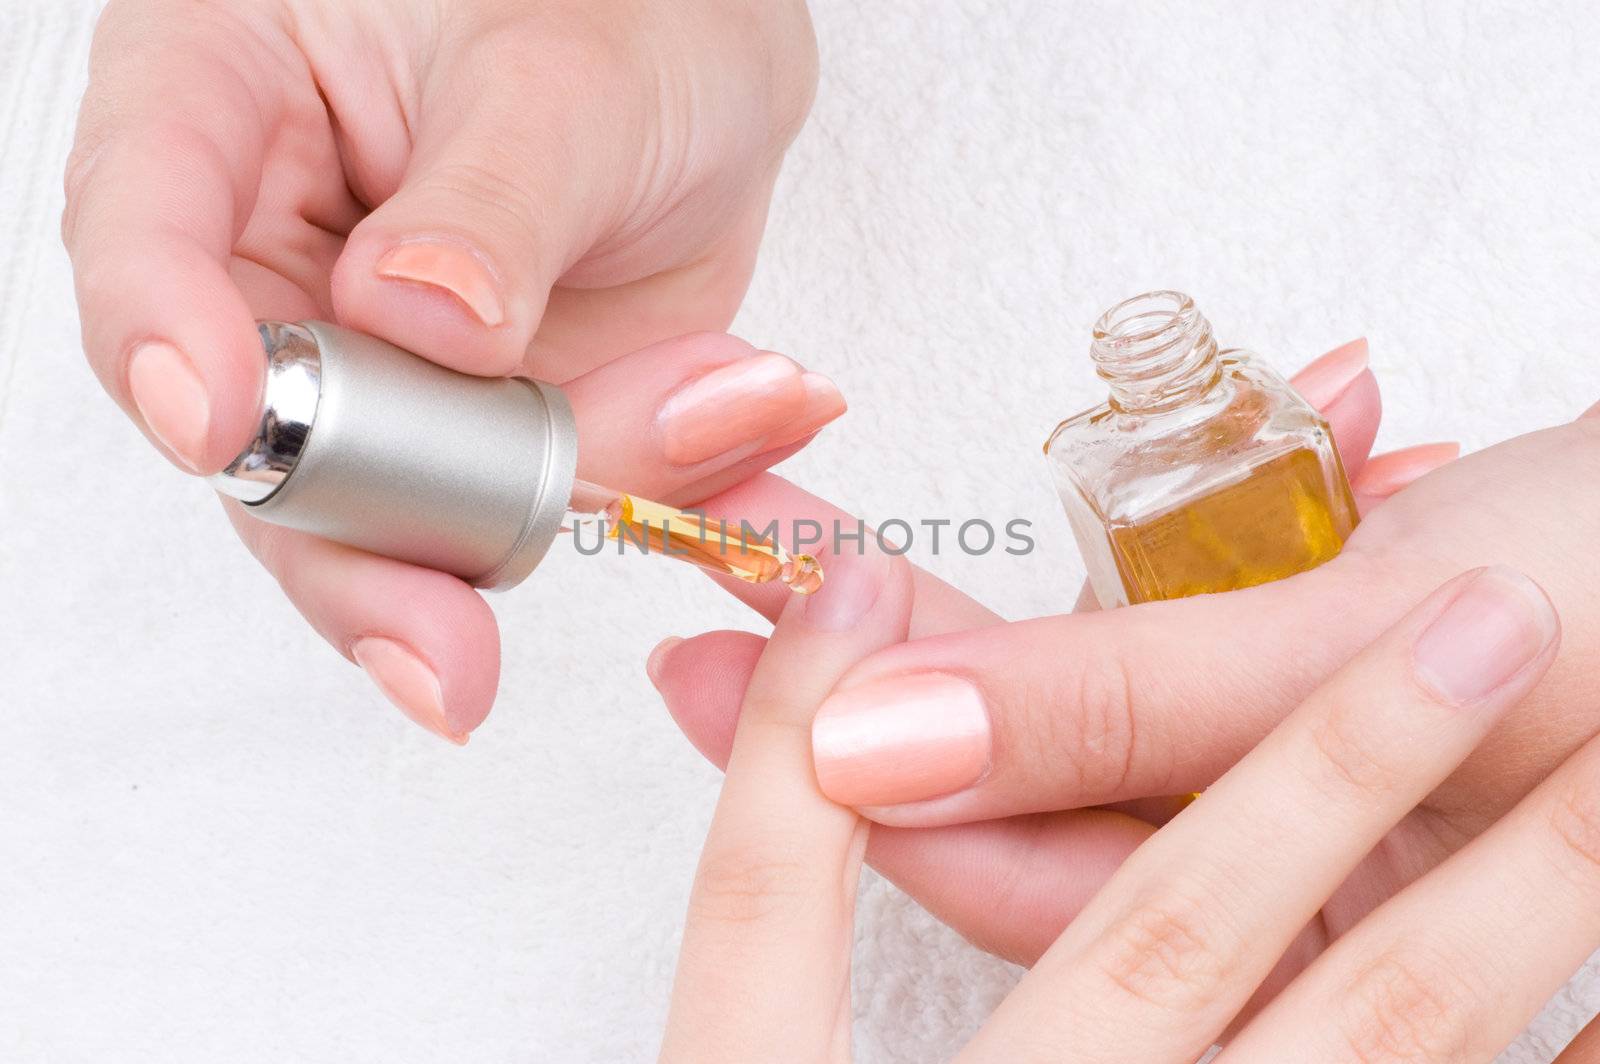 manicure - moisturizing and nutritioning for the nails and skin around nails